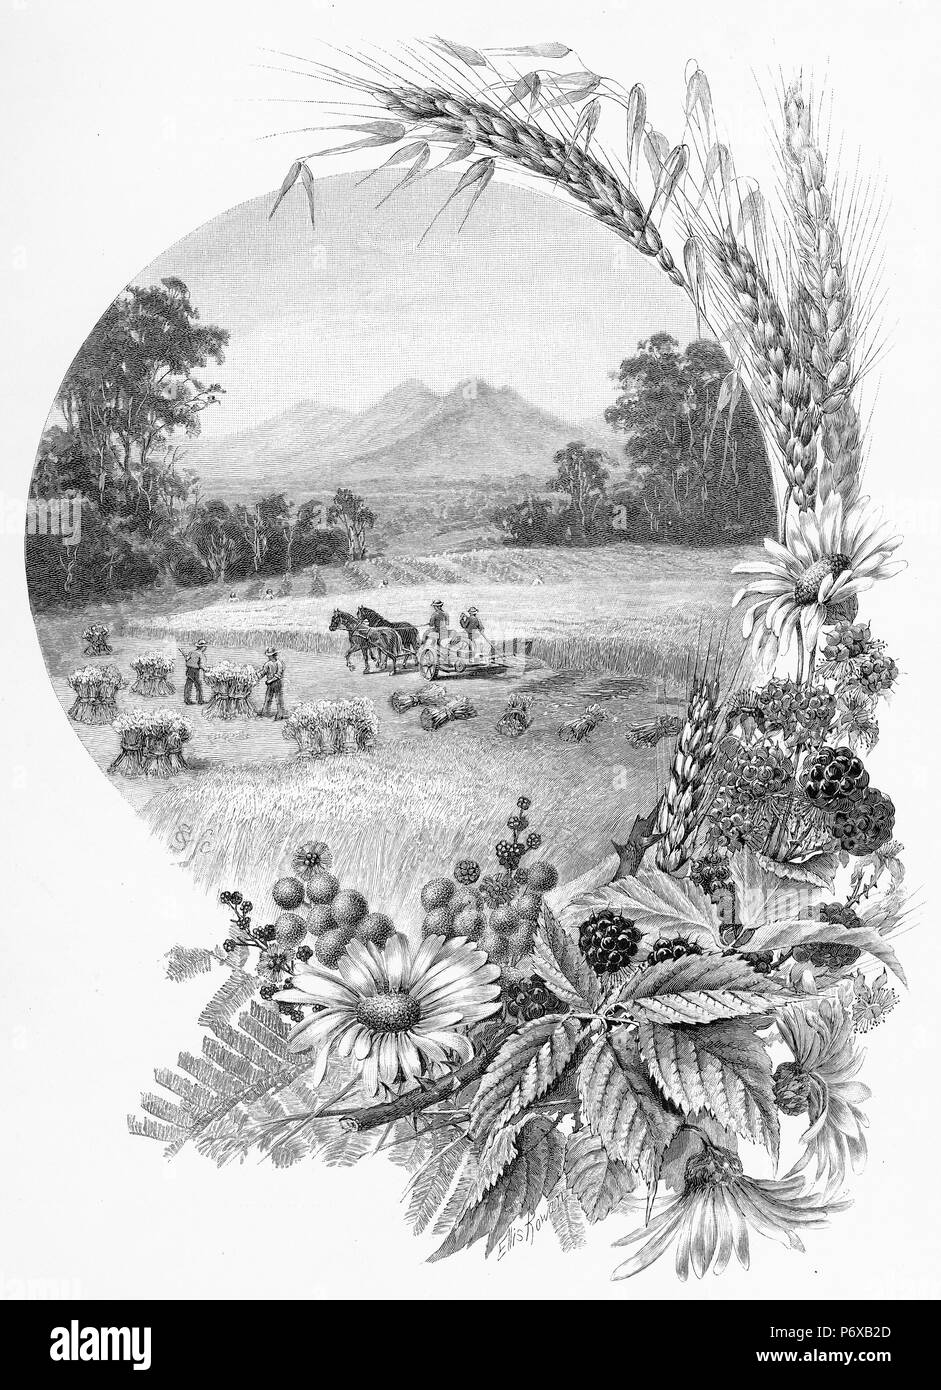 Engraving of a wheat harvest near the You Yangs in Victoria, Australia. From the Picturesque Atlas of Australasia Vol 2, 1886 Stock Photo